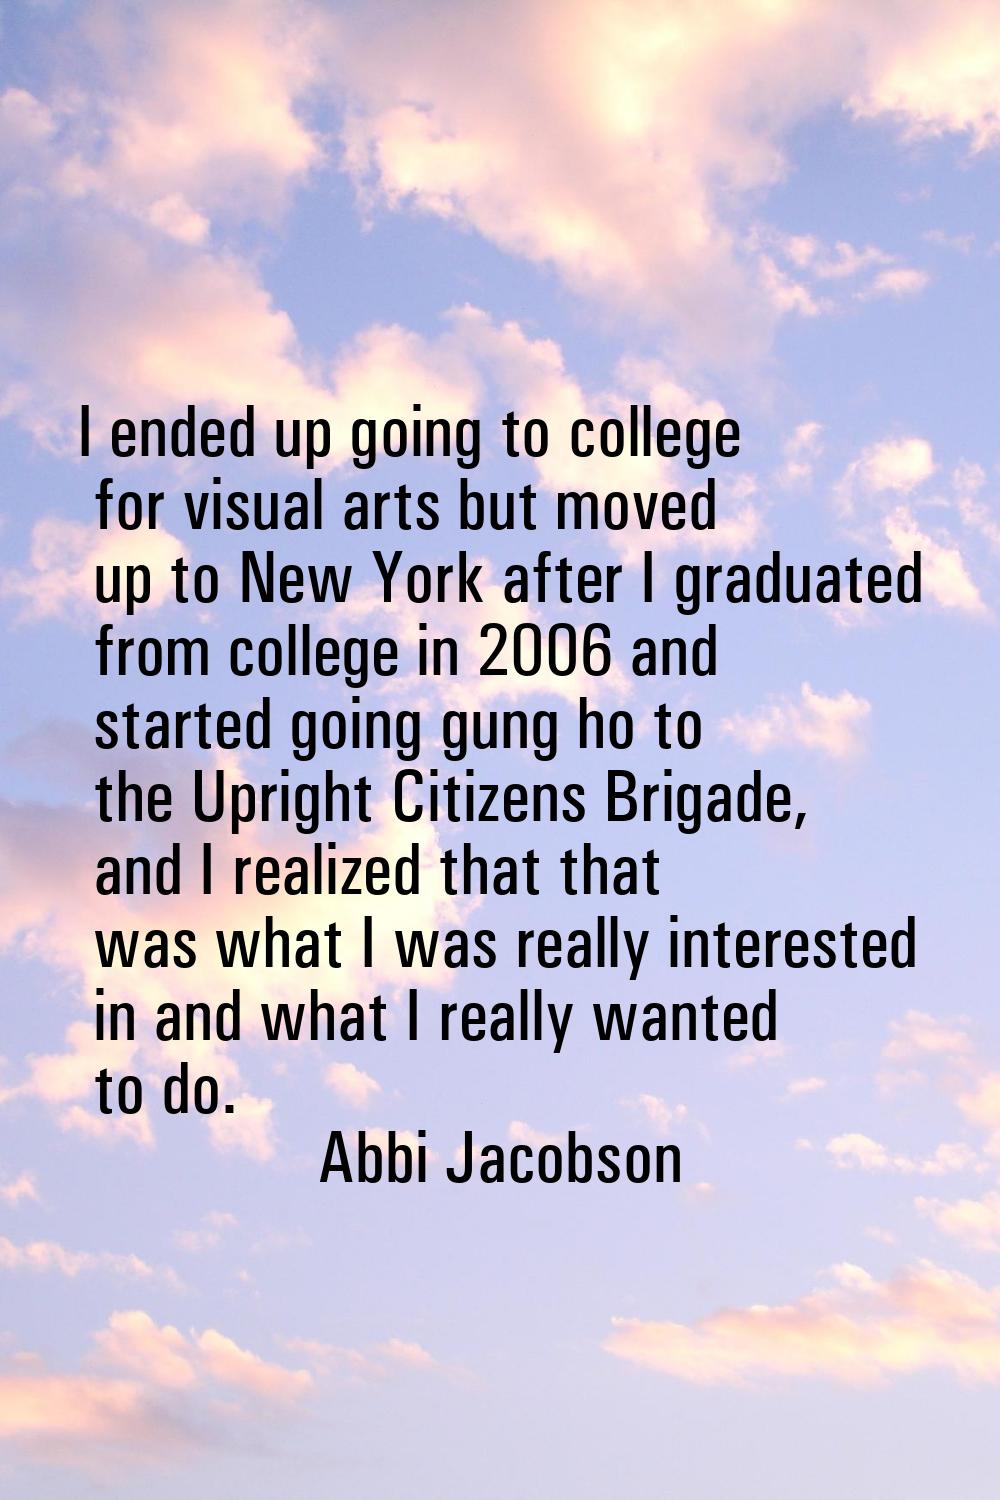 I ended up going to college for visual arts but moved up to New York after I graduated from college